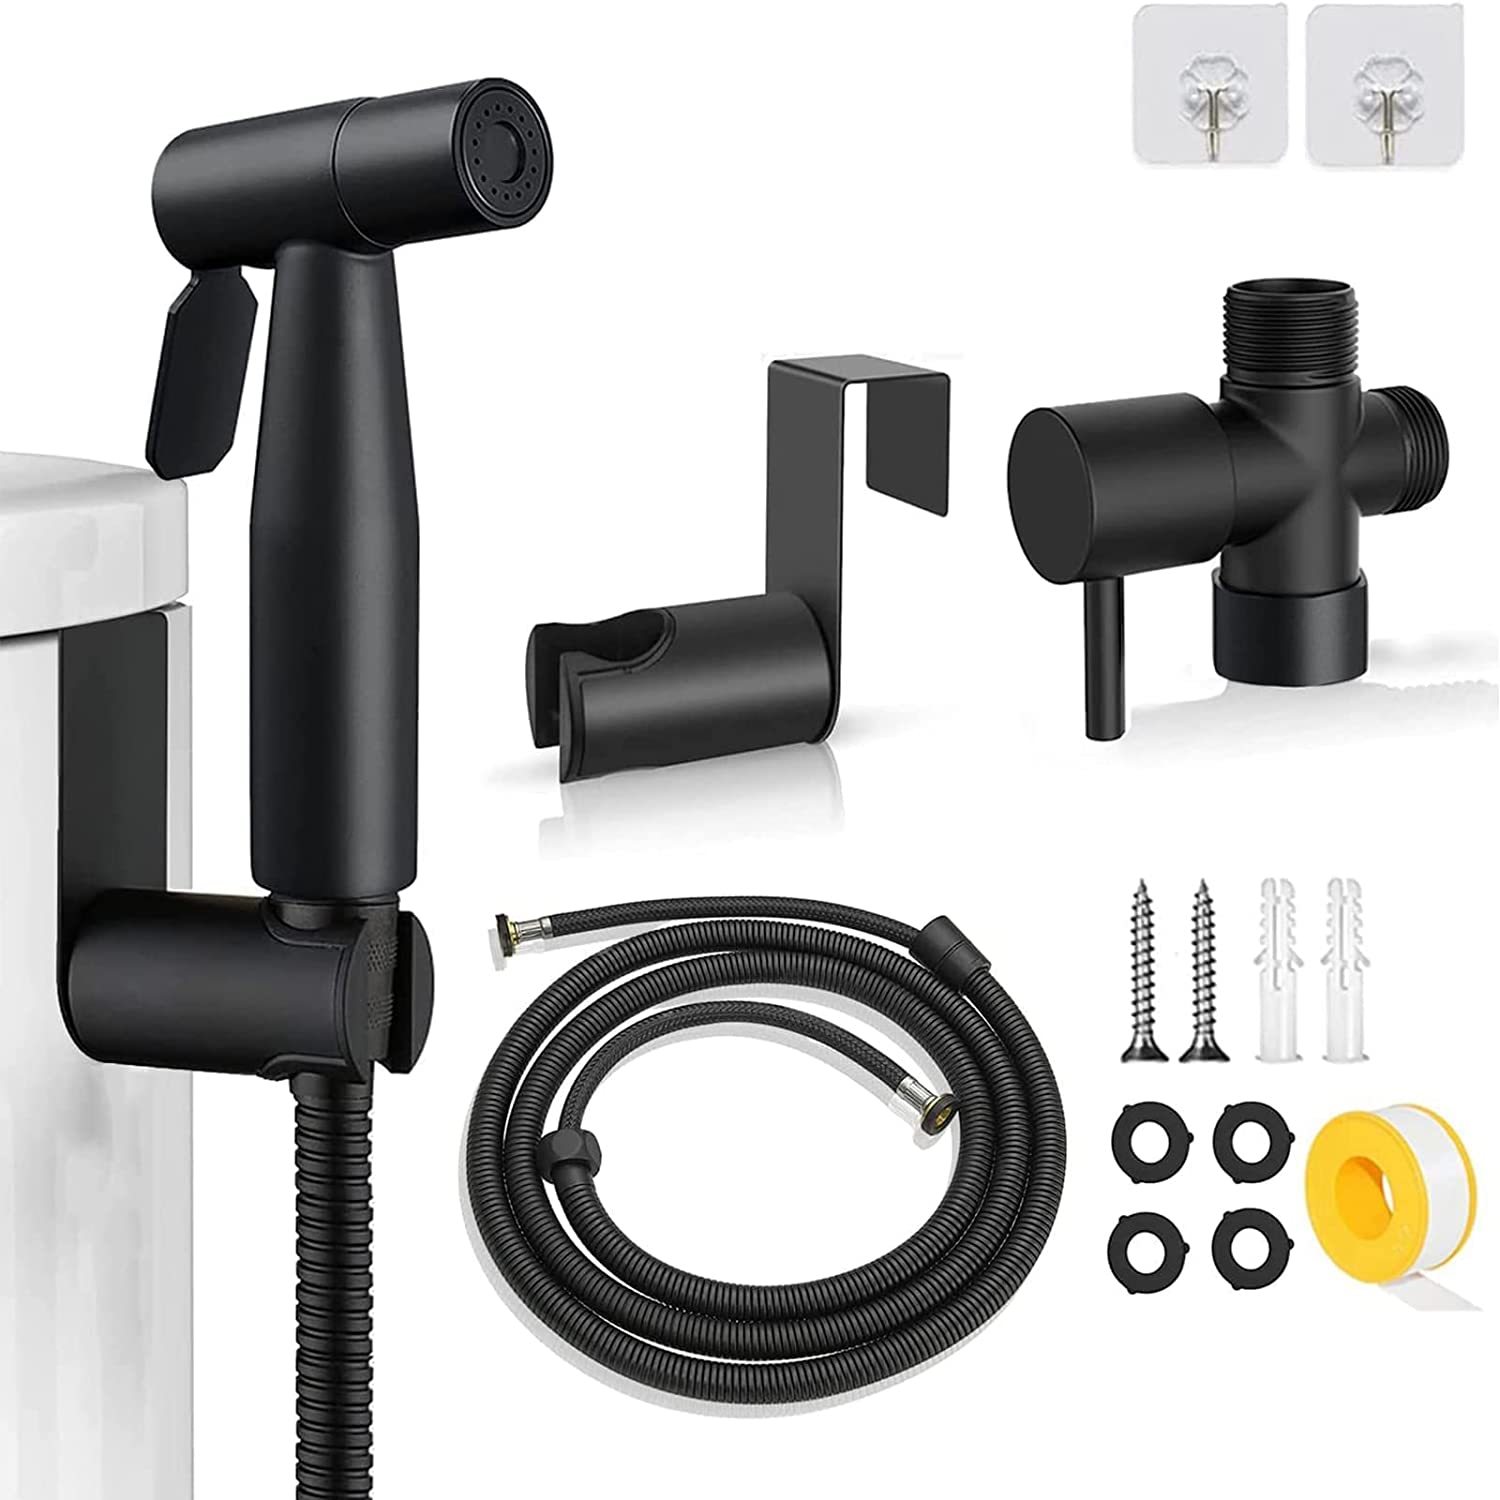 Primary image for Bathroom Jet Sprayer Kit Spray Attachment With 57'' Hose, Adjustable Water